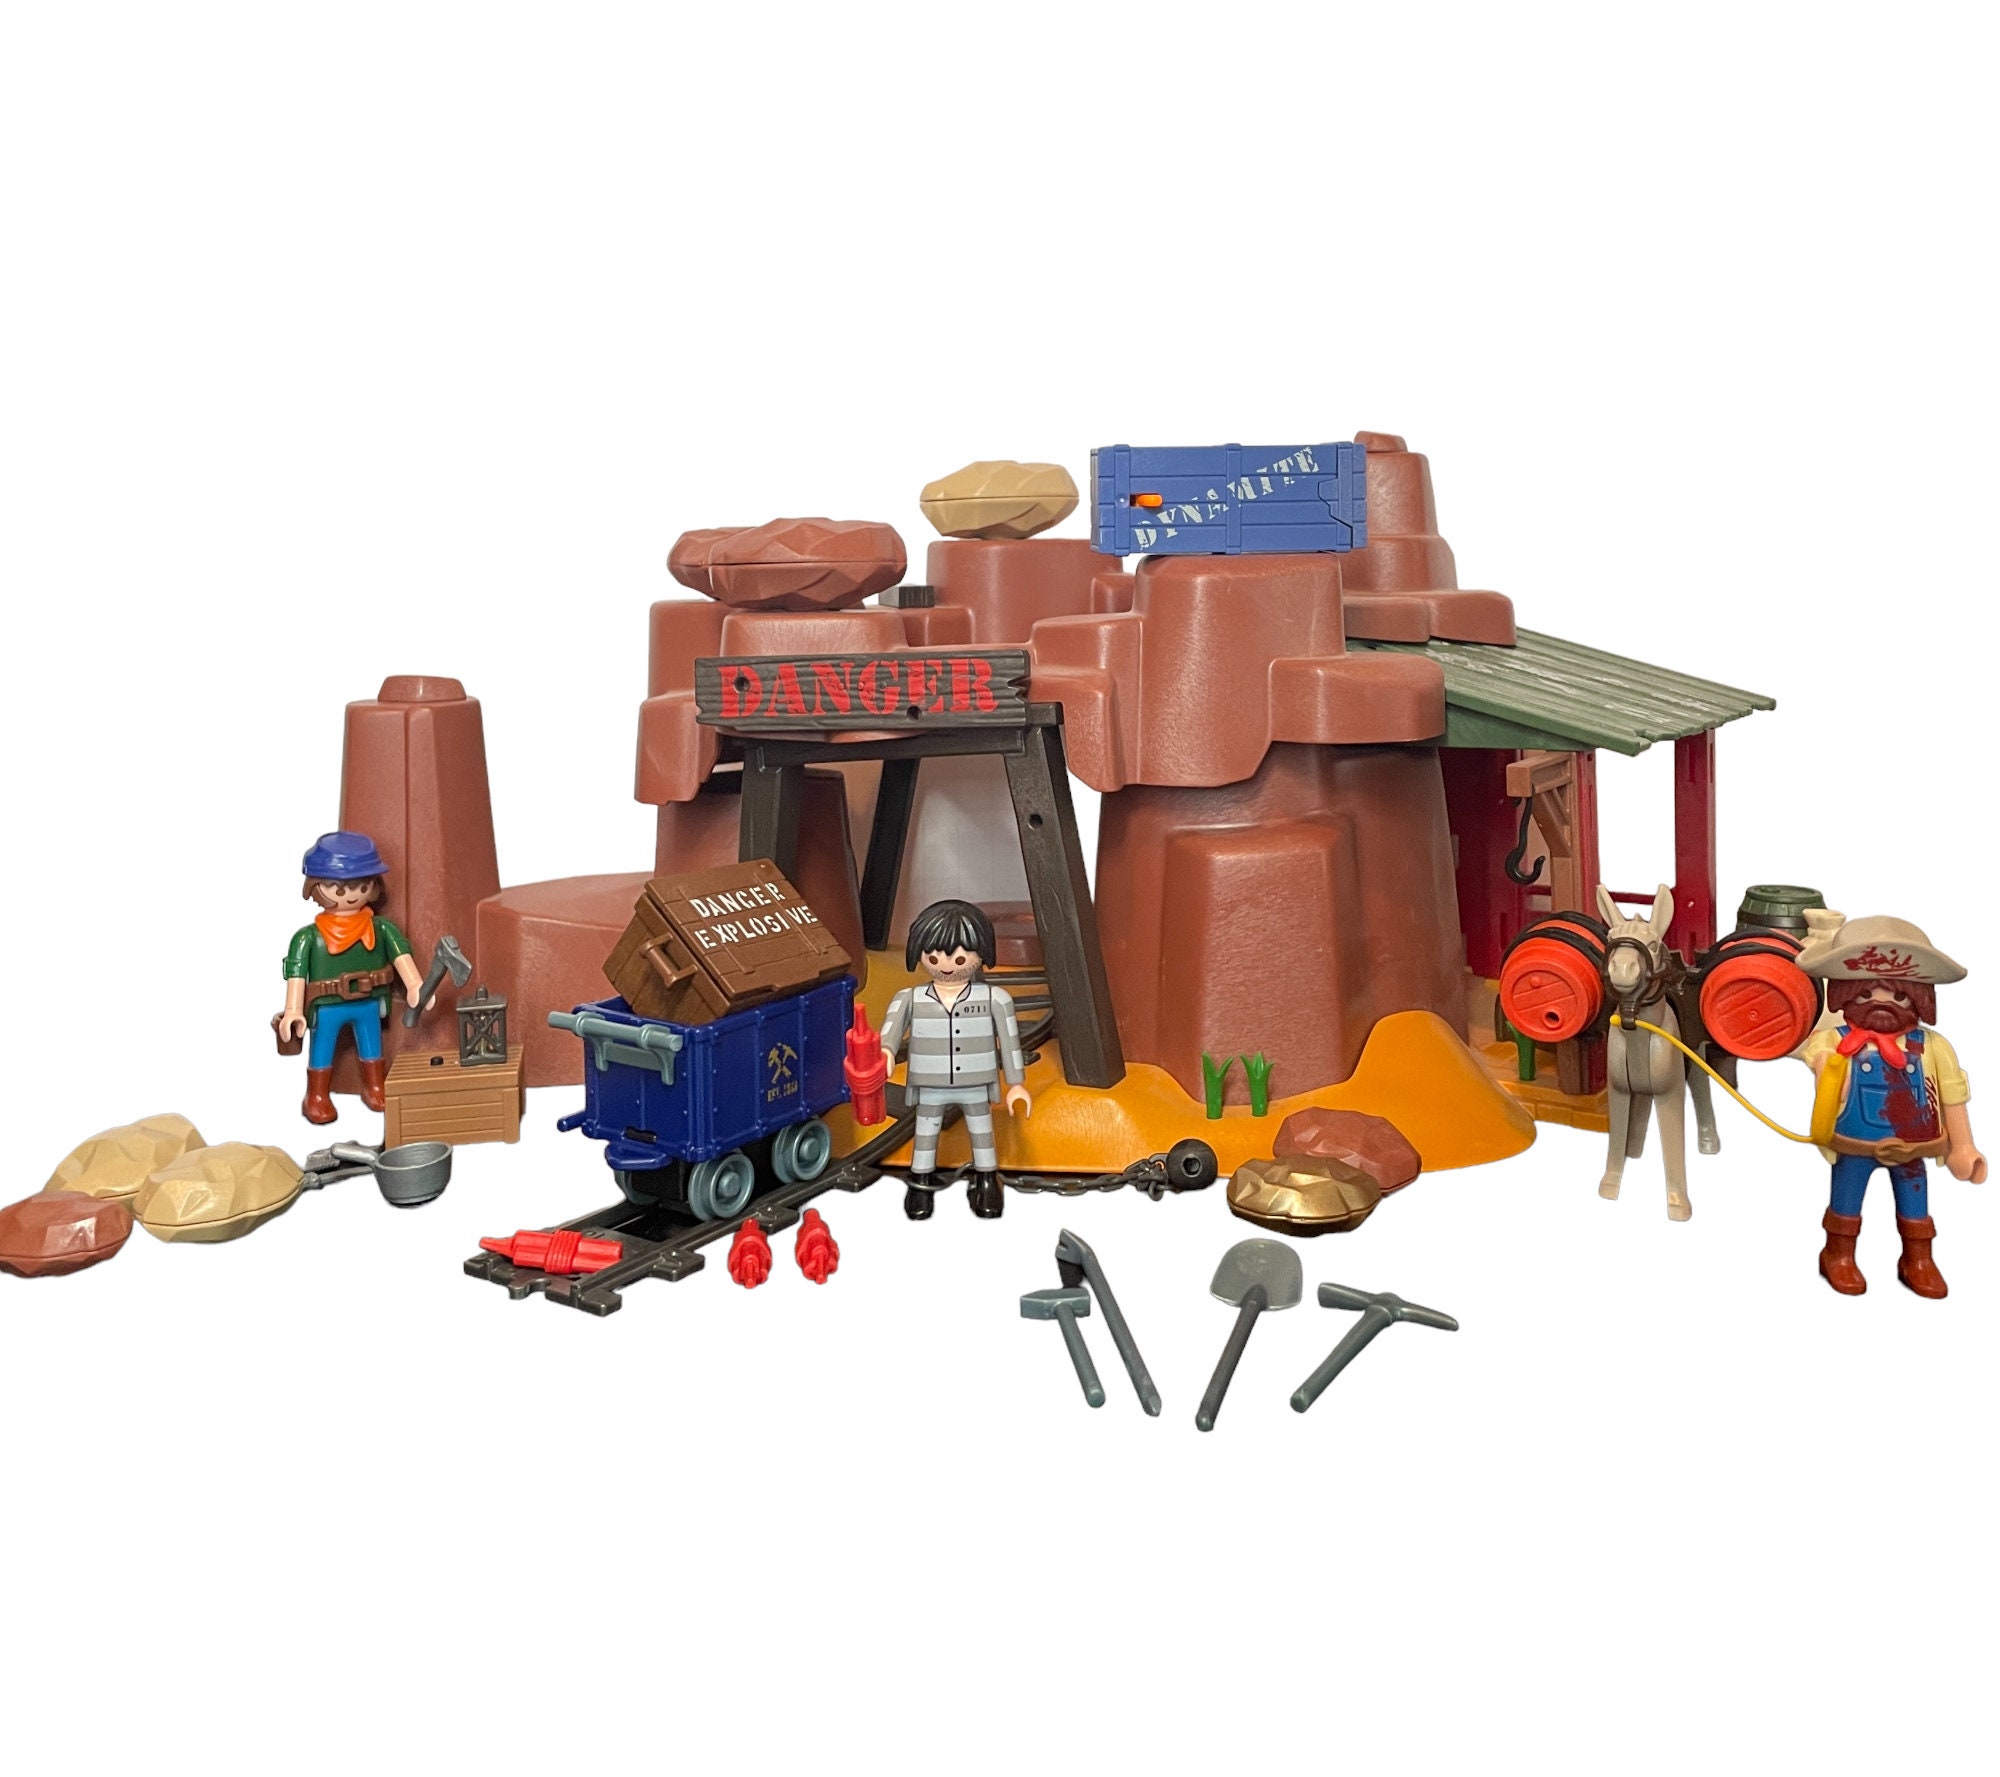 western train – Playmobil News and Reviews –